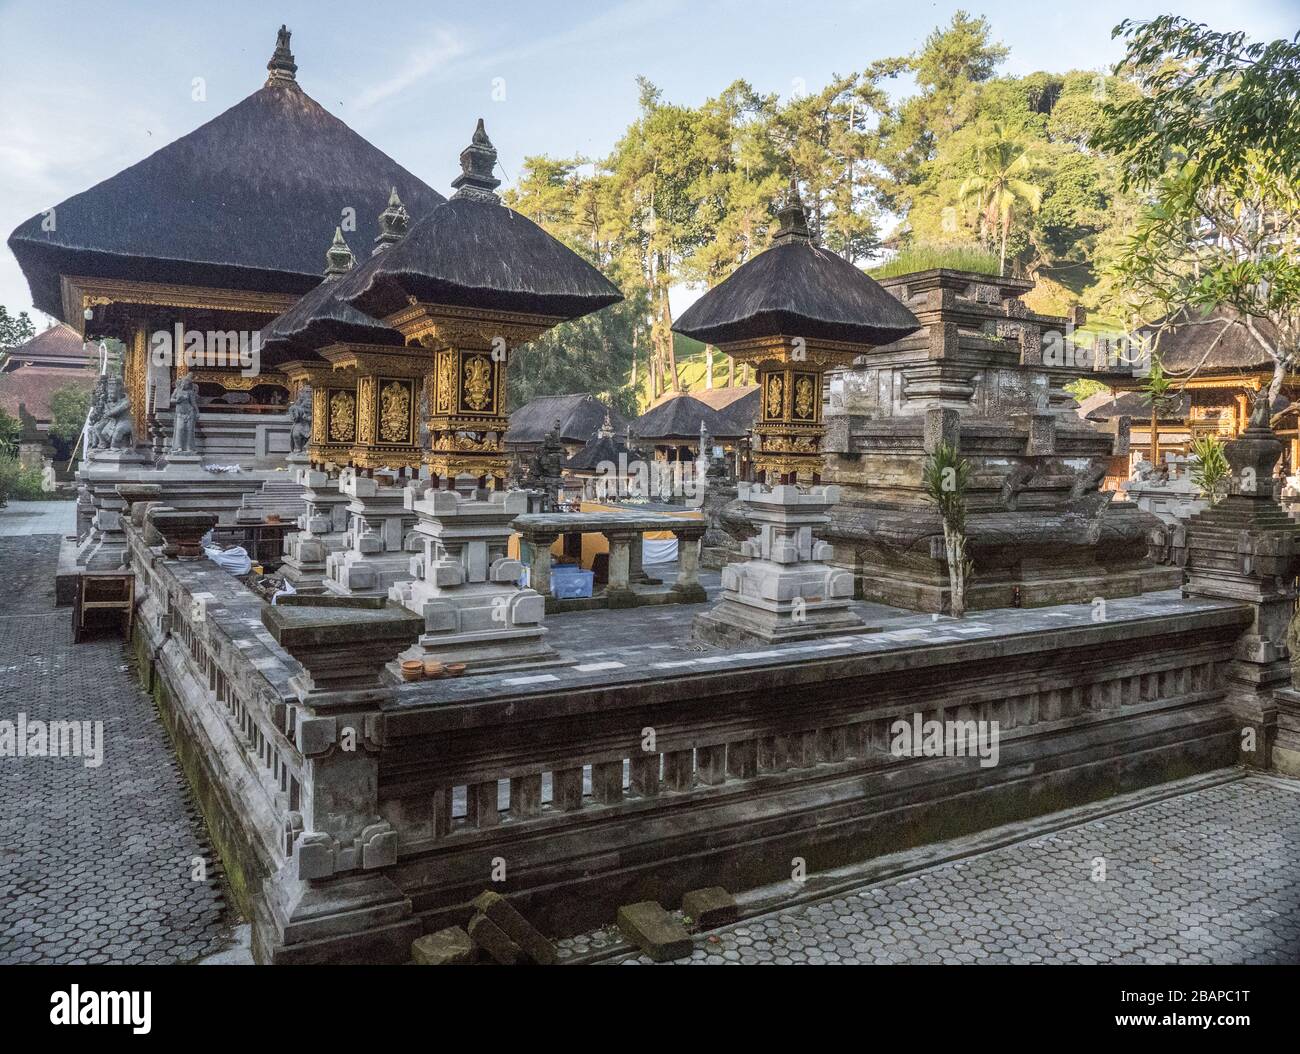 Inner courtyard of Holy Water Temple in Bali Indonesia with golden temple structures and black roofs in early morning light with no people. Stock Photo